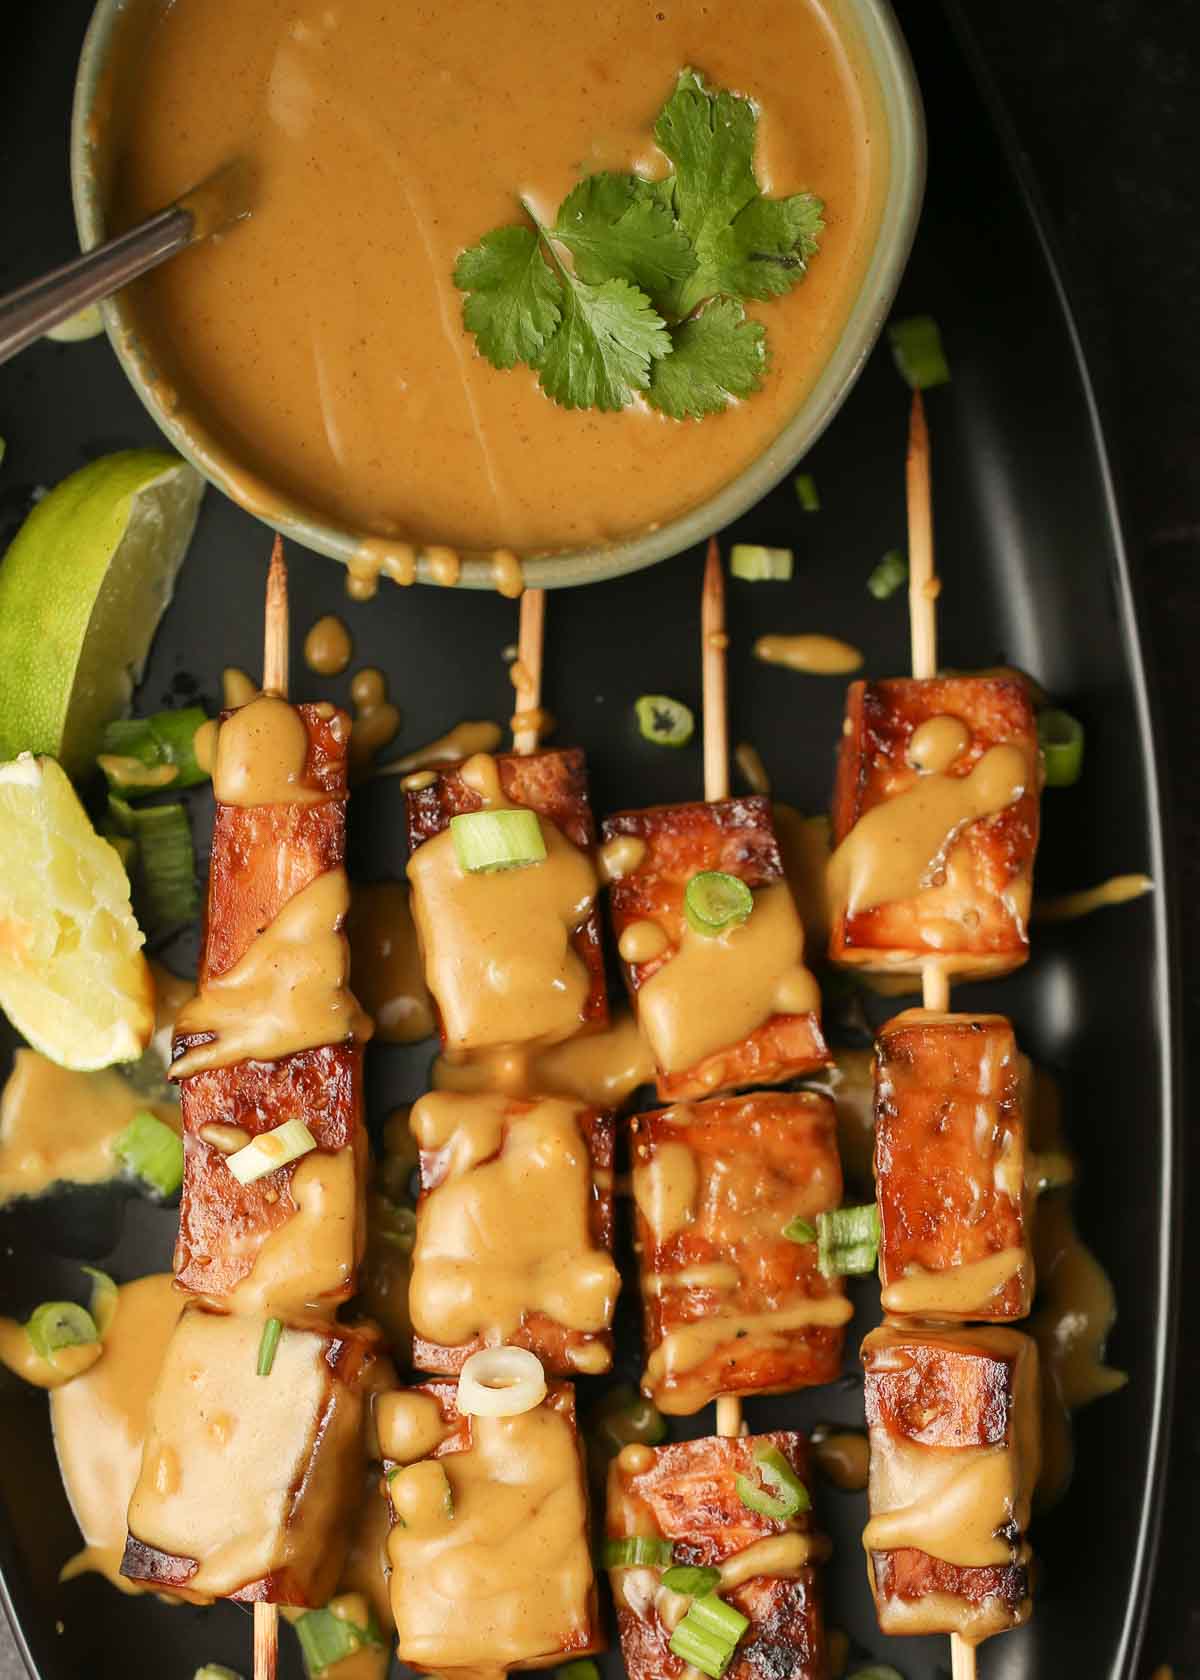 Our Very Favorite Homemade Peanut Sauce Recipe - Just six ingredients make up this rich and savory peanut sauce. Drizzle it over tofu, chicken, and broccoli or dip your favorite veggies in. Versatile and addicting!